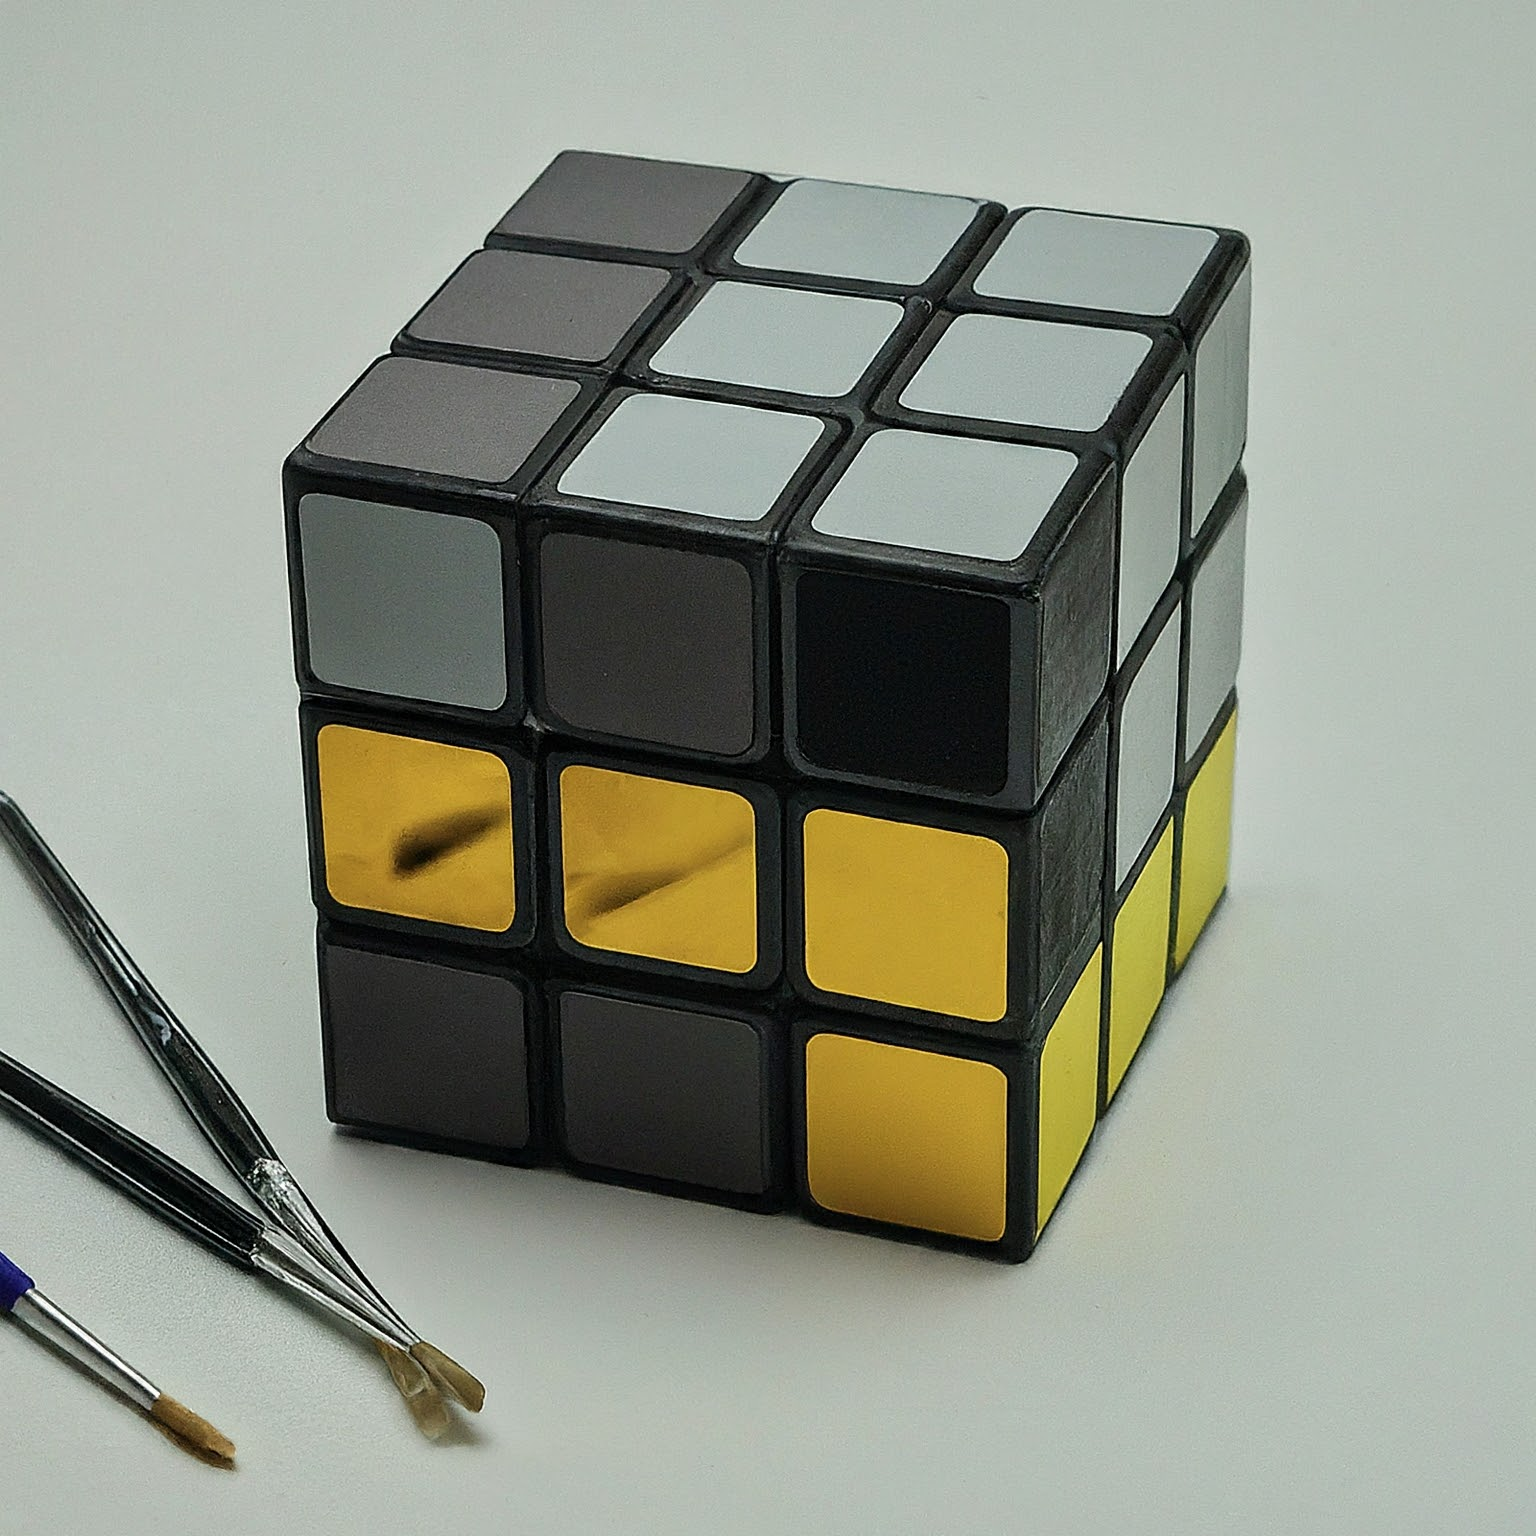 A classic Rubik's cube with a white background. The cube's sides are a mix of golden grey and black shades. 